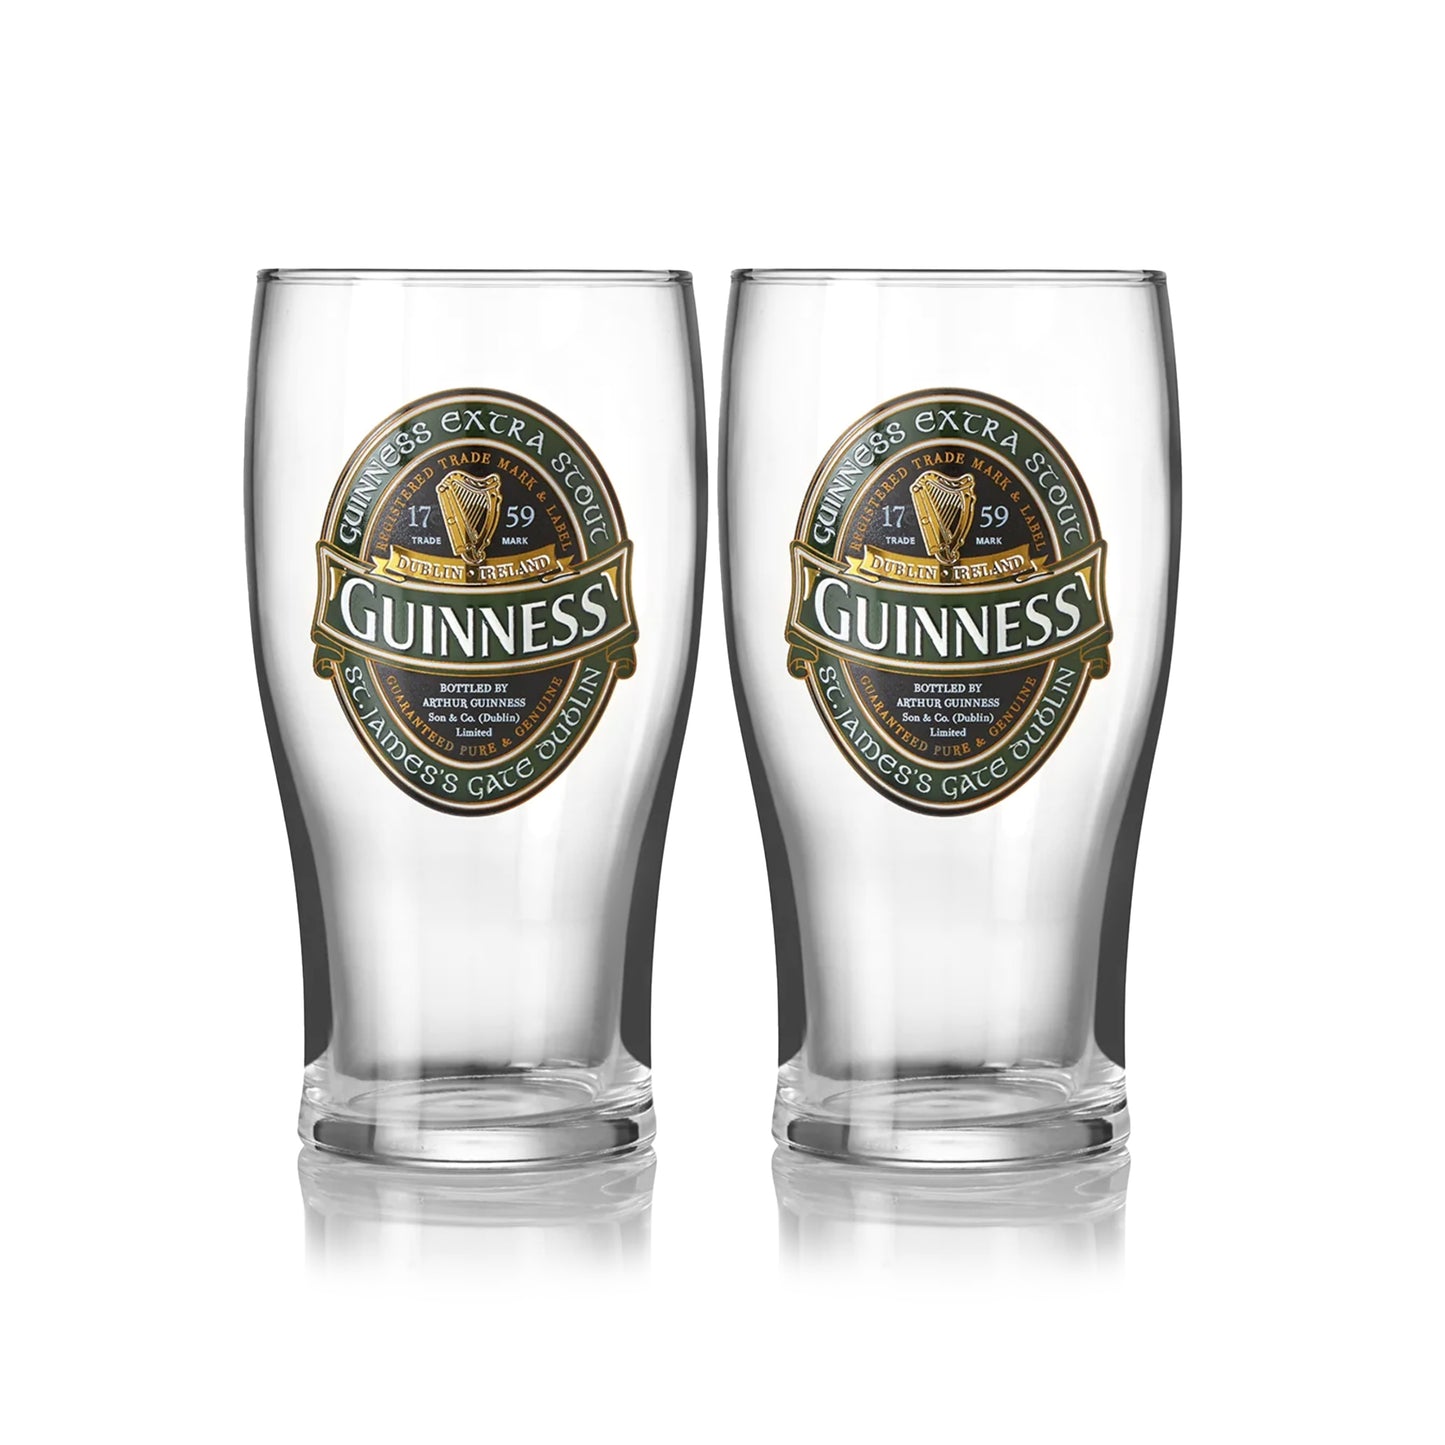 A pair of Guinness Ireland Collection pint glasses featuring the Extra Stout Label, placed on a crisp white background.